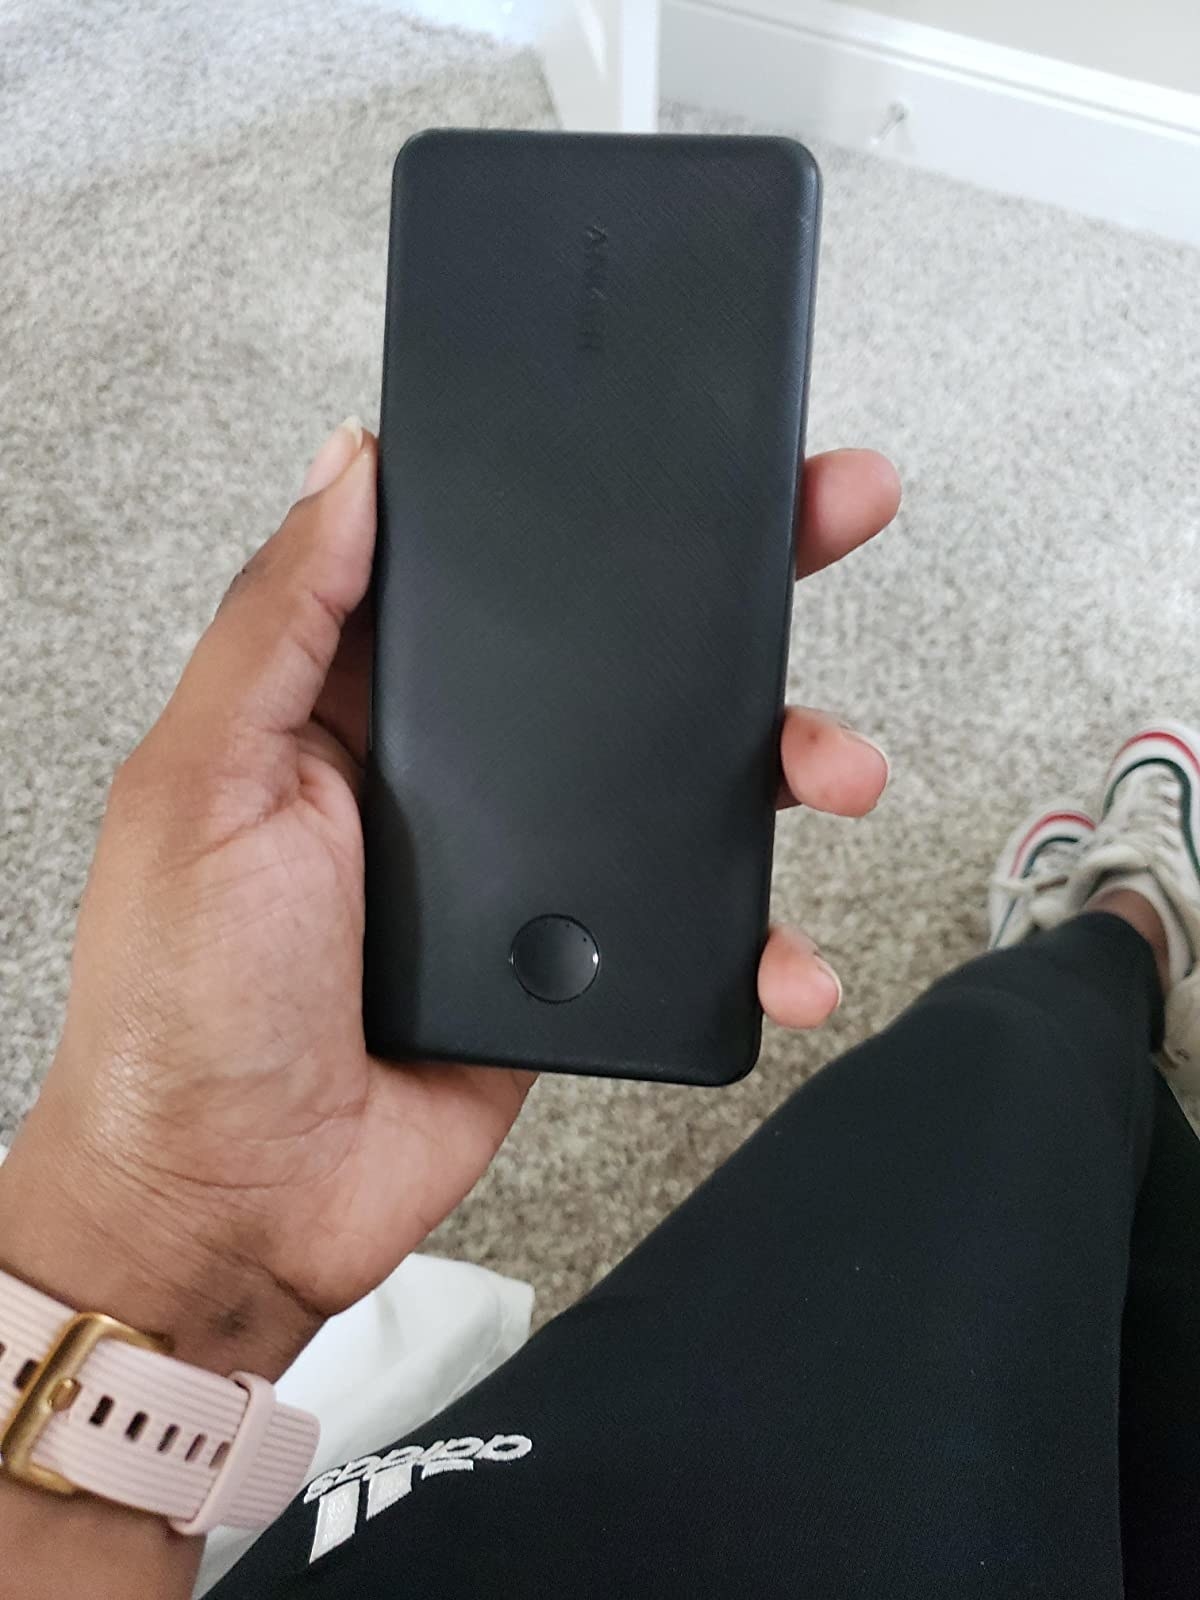 reviewer holding the slim black portable charger